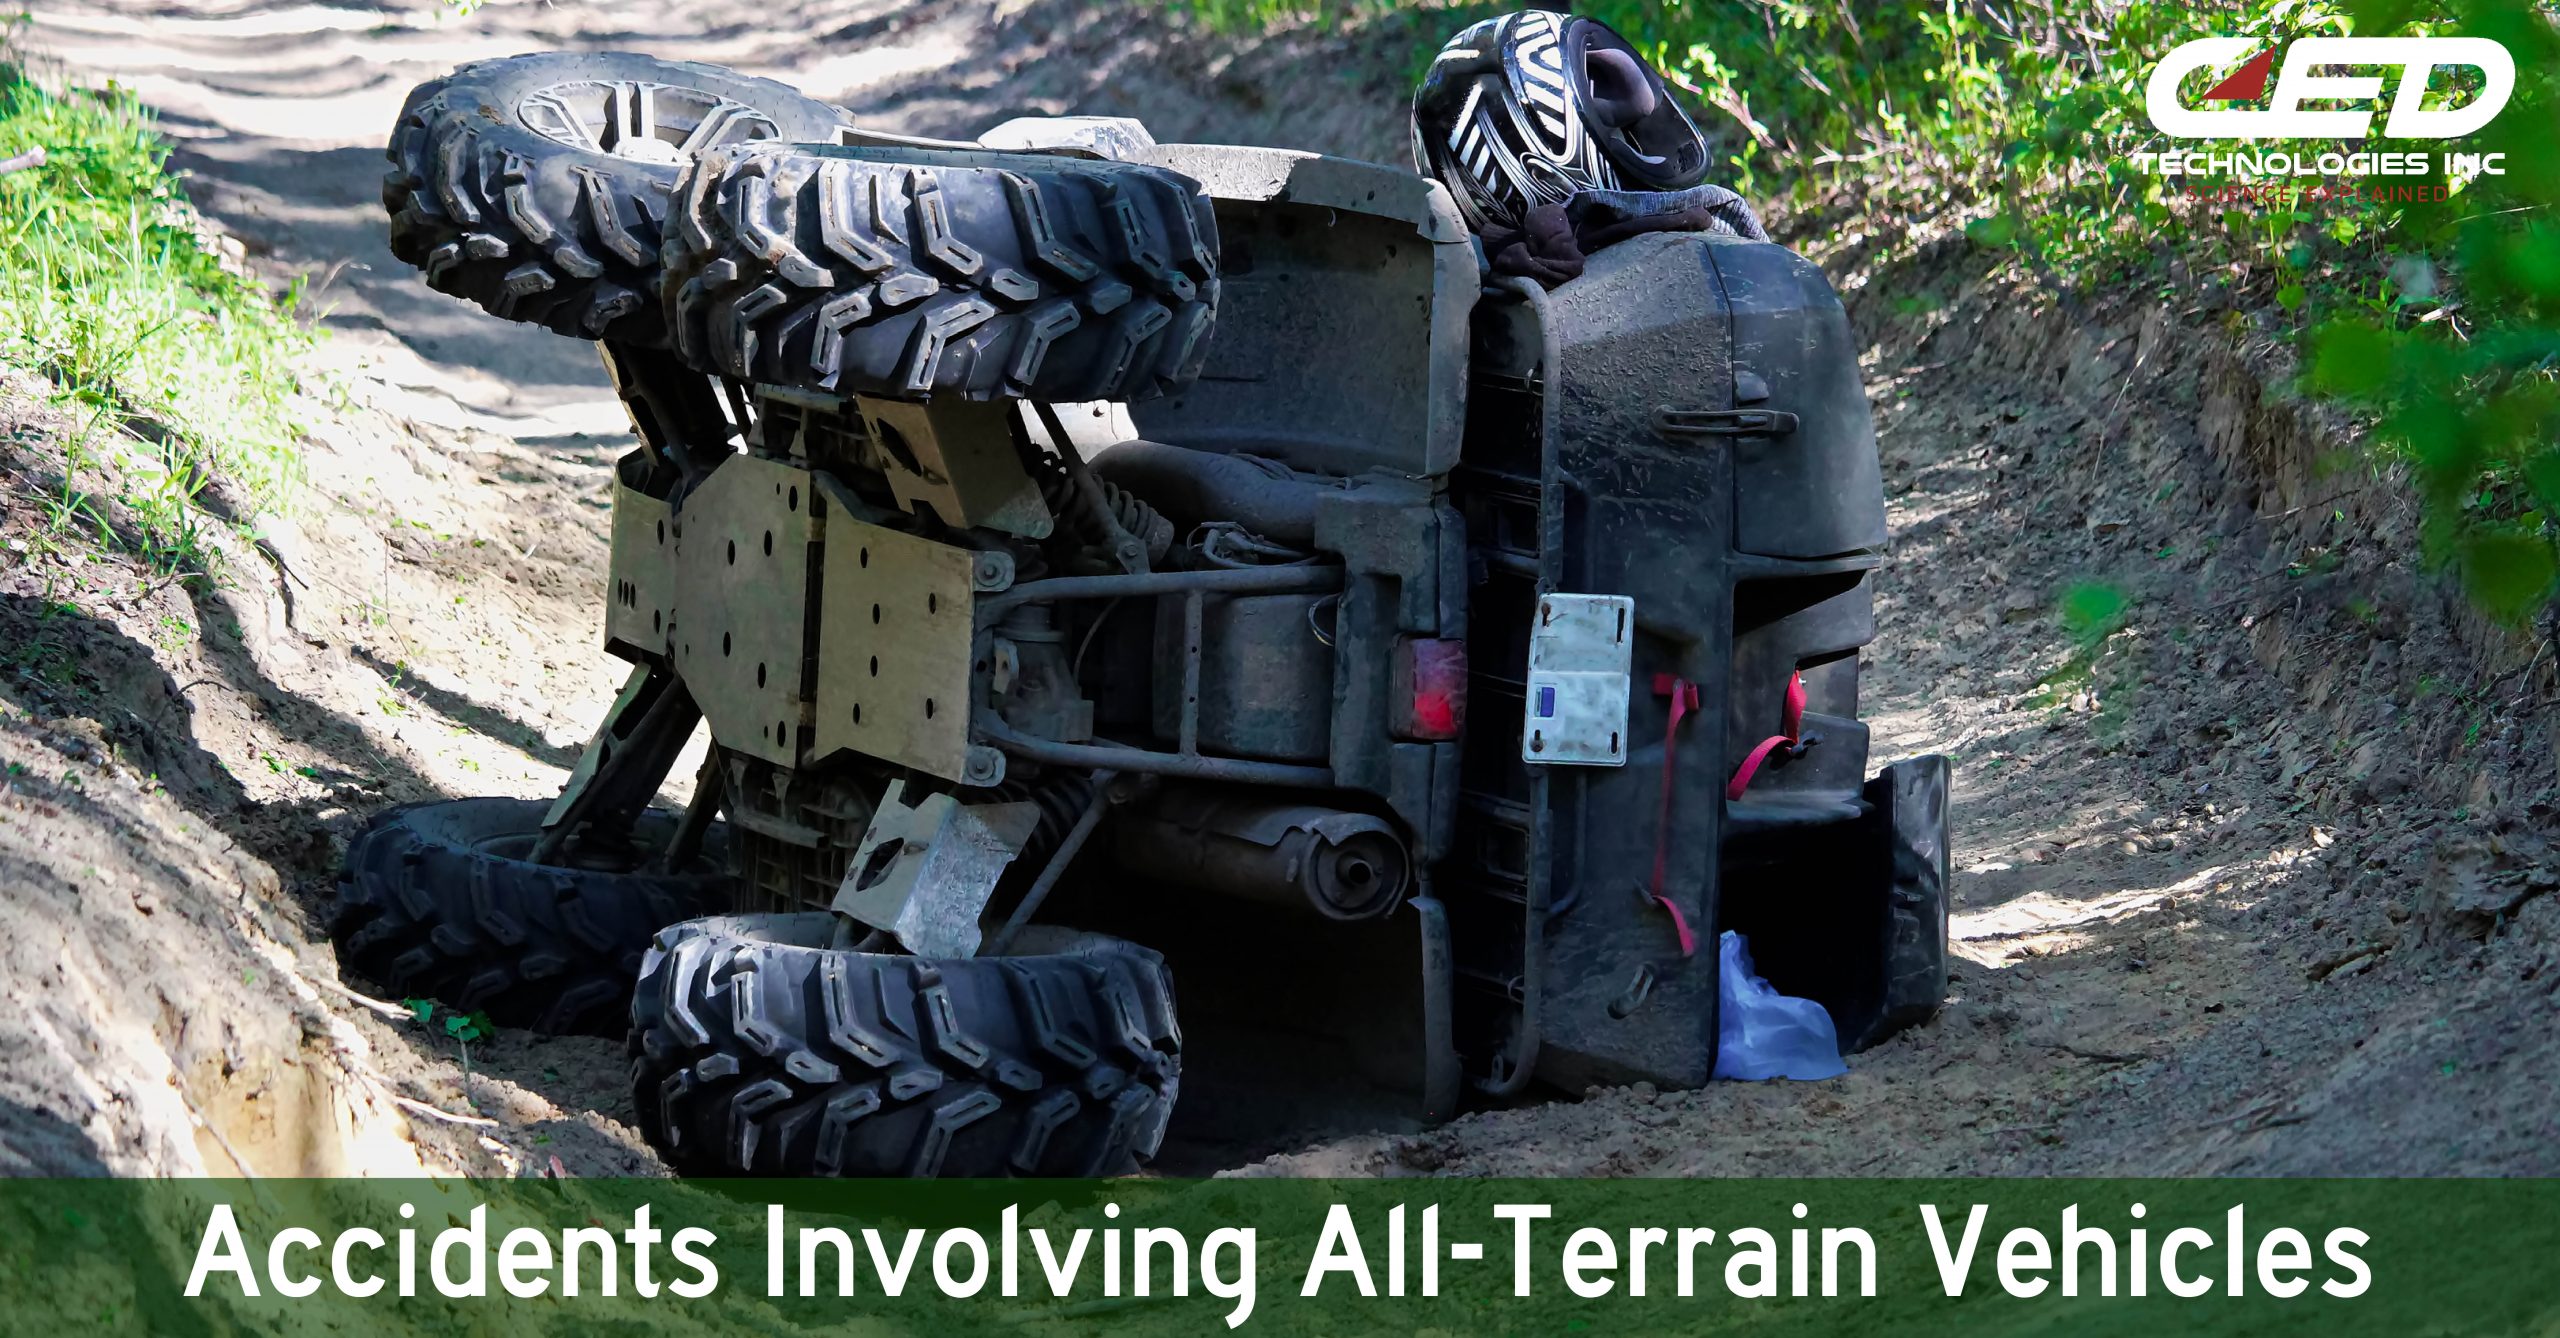 Investigating Accidents Involving All-Terrain Vehicles